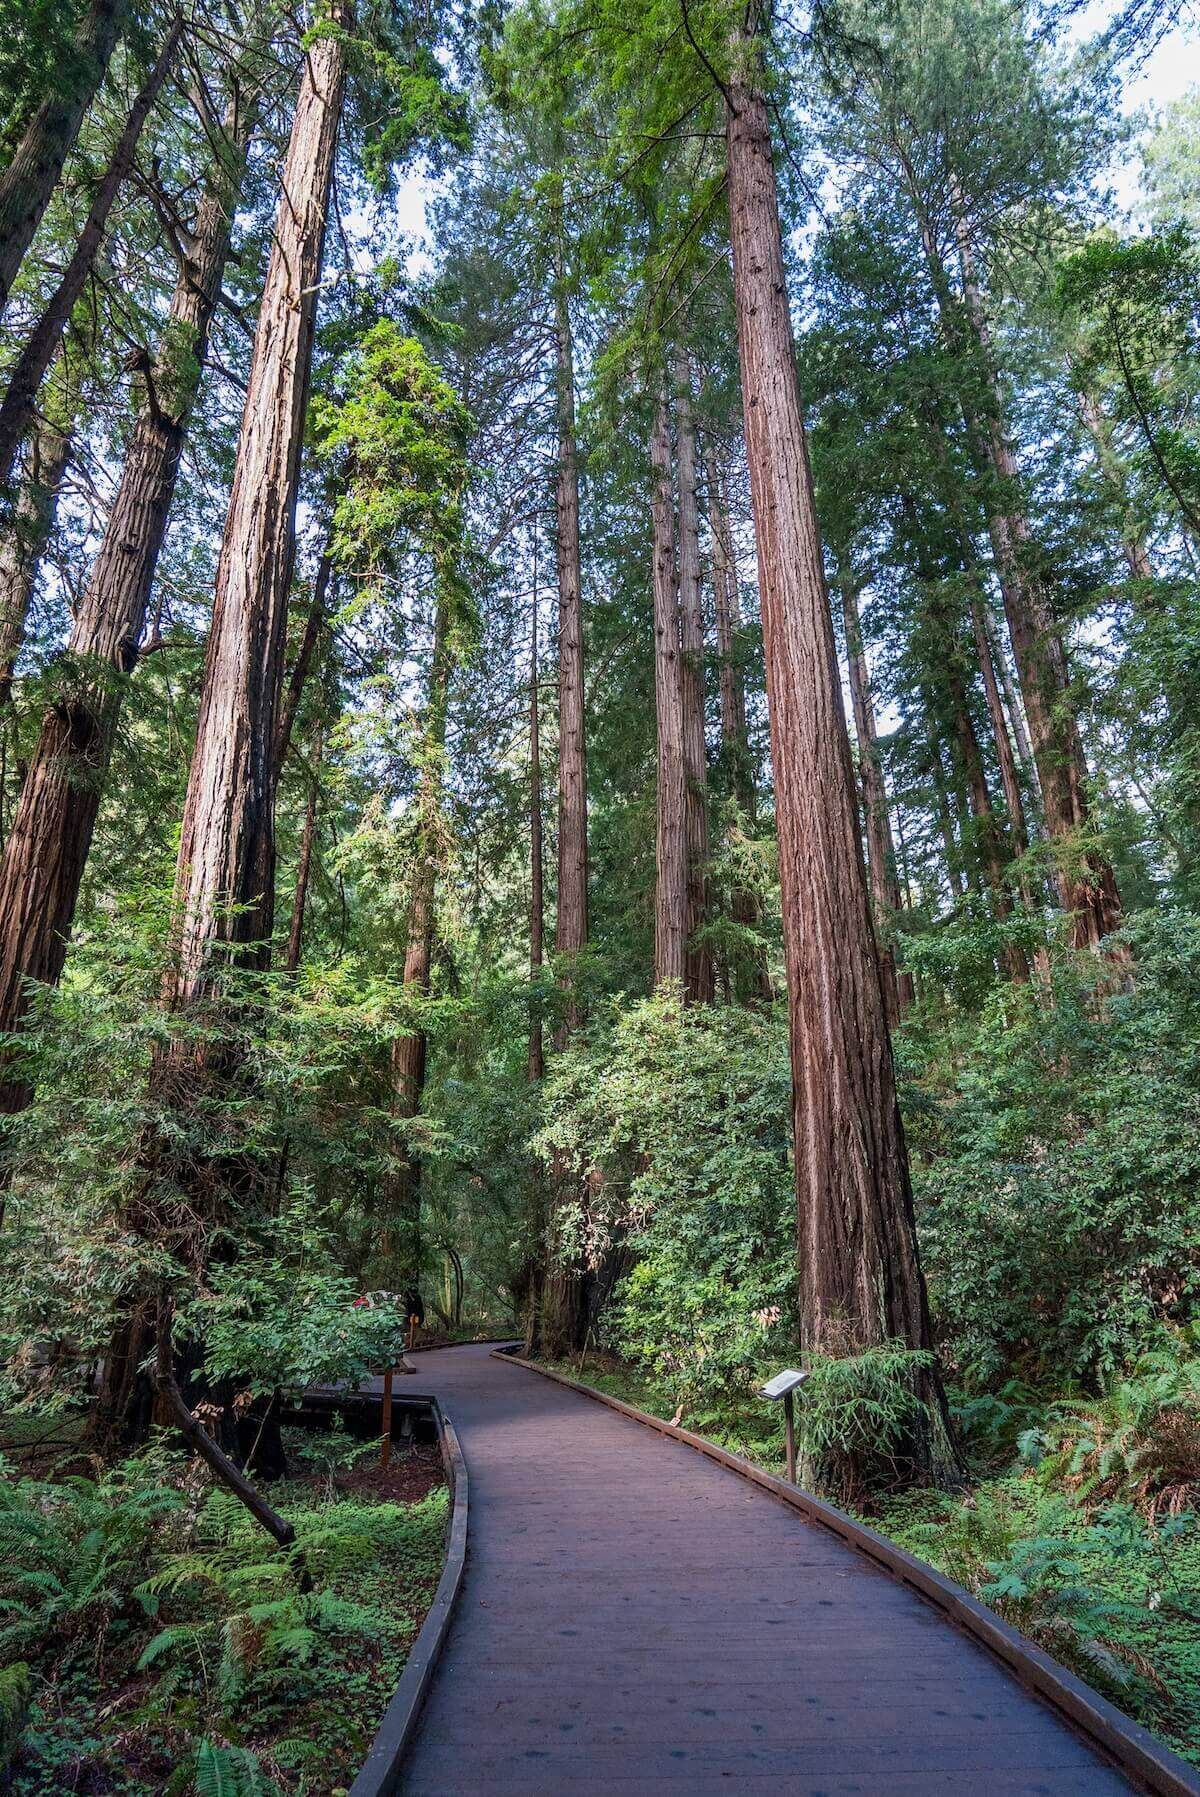 A view of the boardwalk path of the Muir Woods Main Trail, lined by towering redwoods.